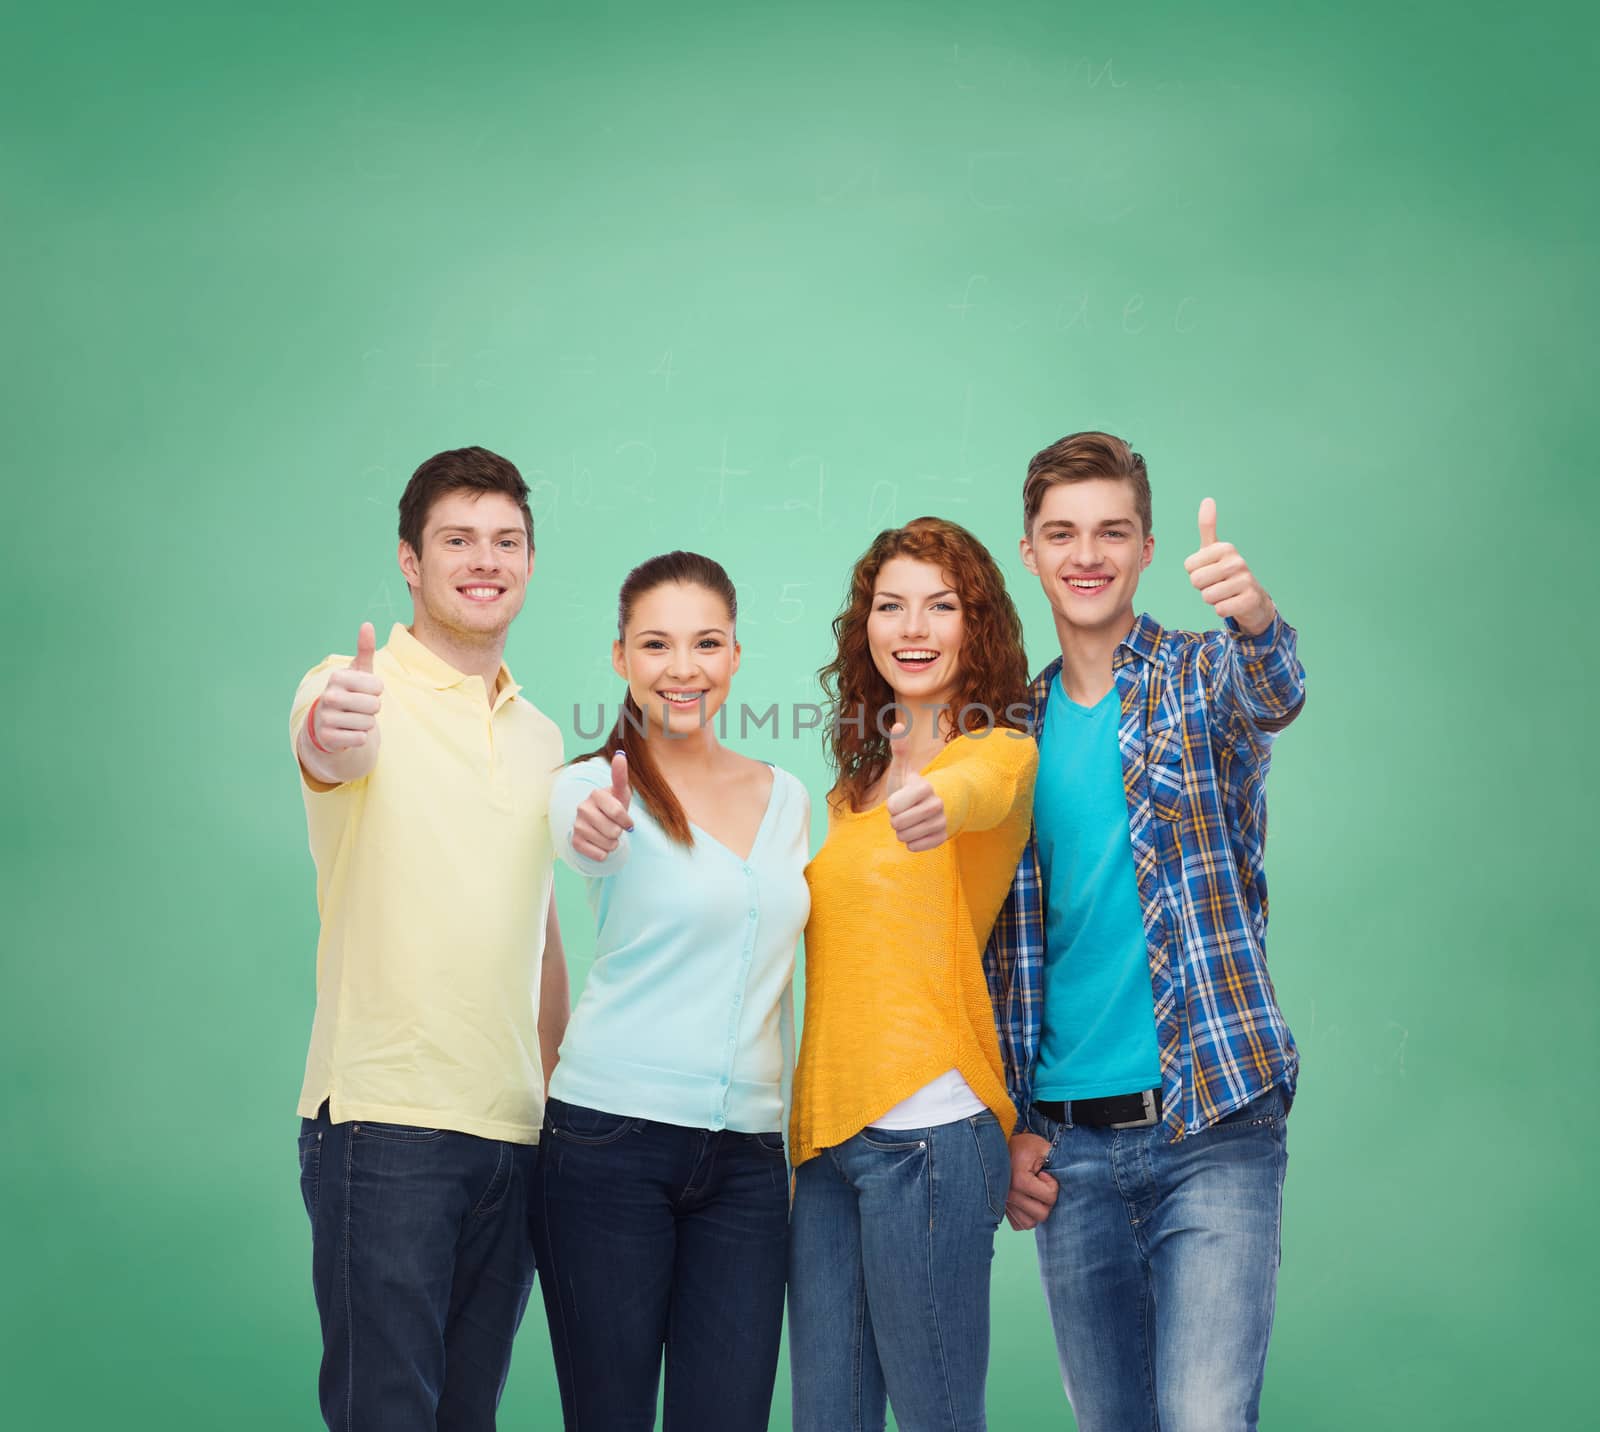 friendship, education, school and people concept - group of smiling teenagers showing thumbs up over green board background